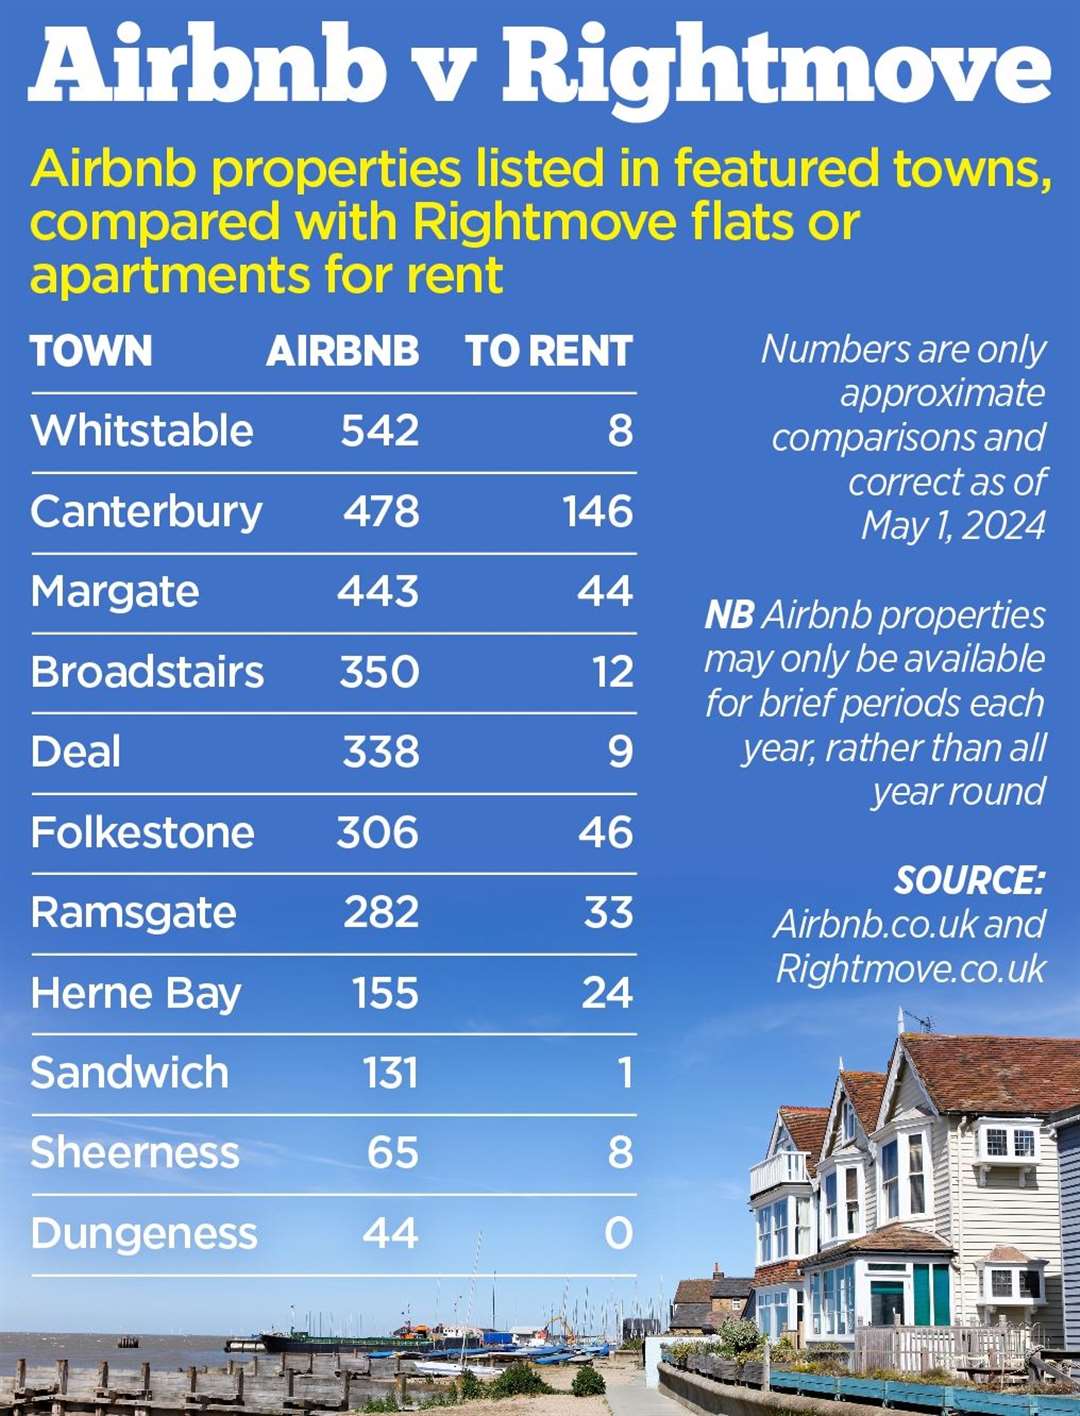 A comparison of Airbnb properties vs Rightmove apartments to rent